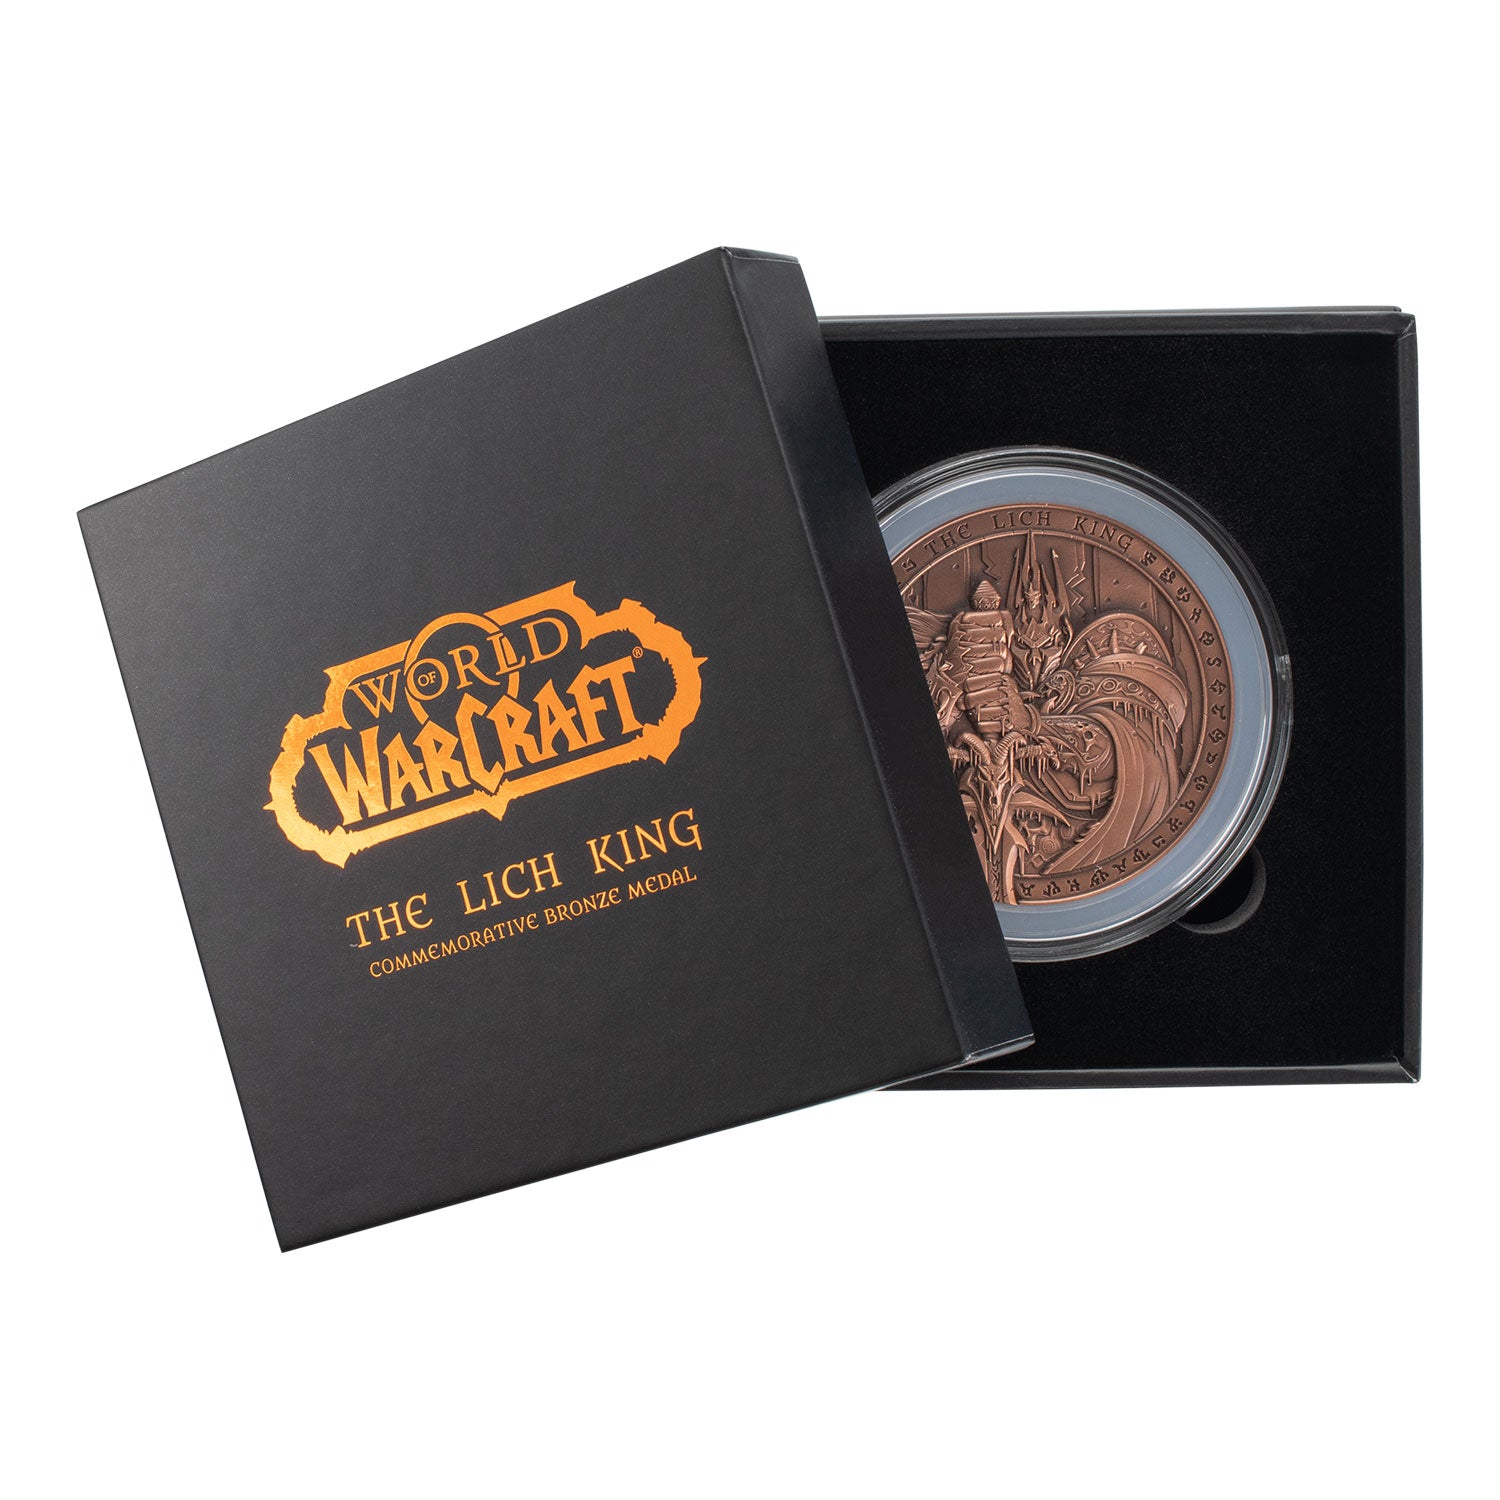 World of Warcraft Lich King Commemorative Bronze Medal - Front View in Box